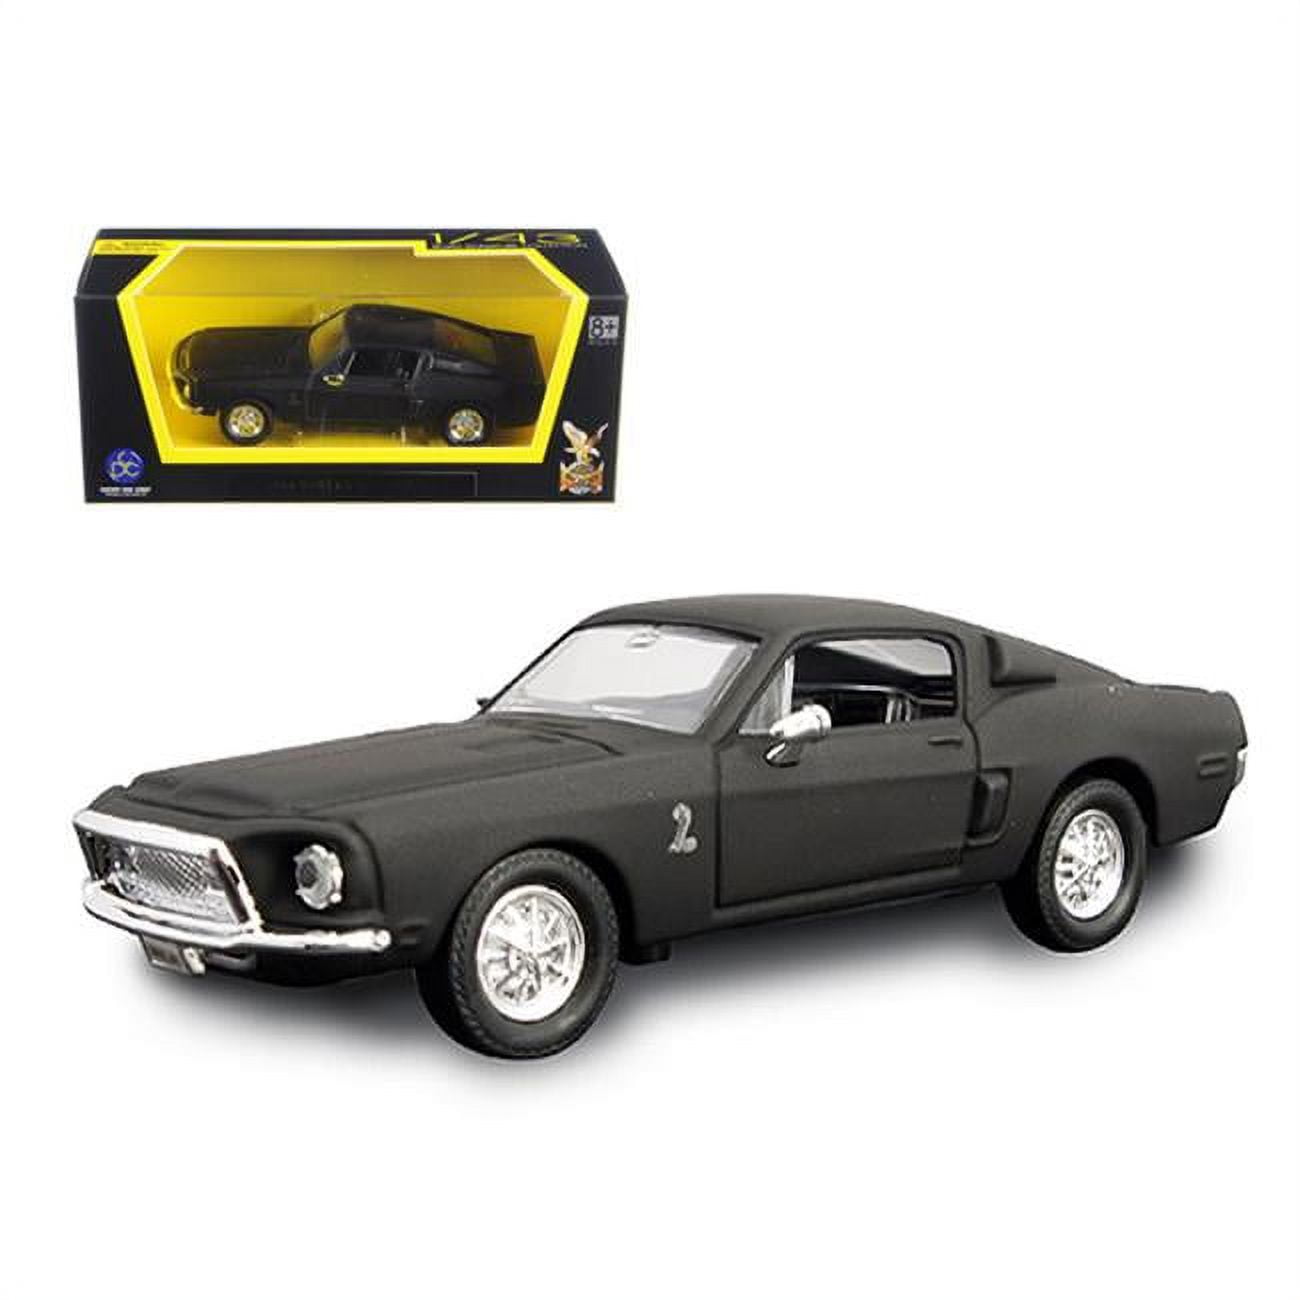 94214mbk 1 by 43 1968 Ford Shel by Mustang GT 500 KR Diecast Model Car, Matte Black -  ROAD SIGNATURE